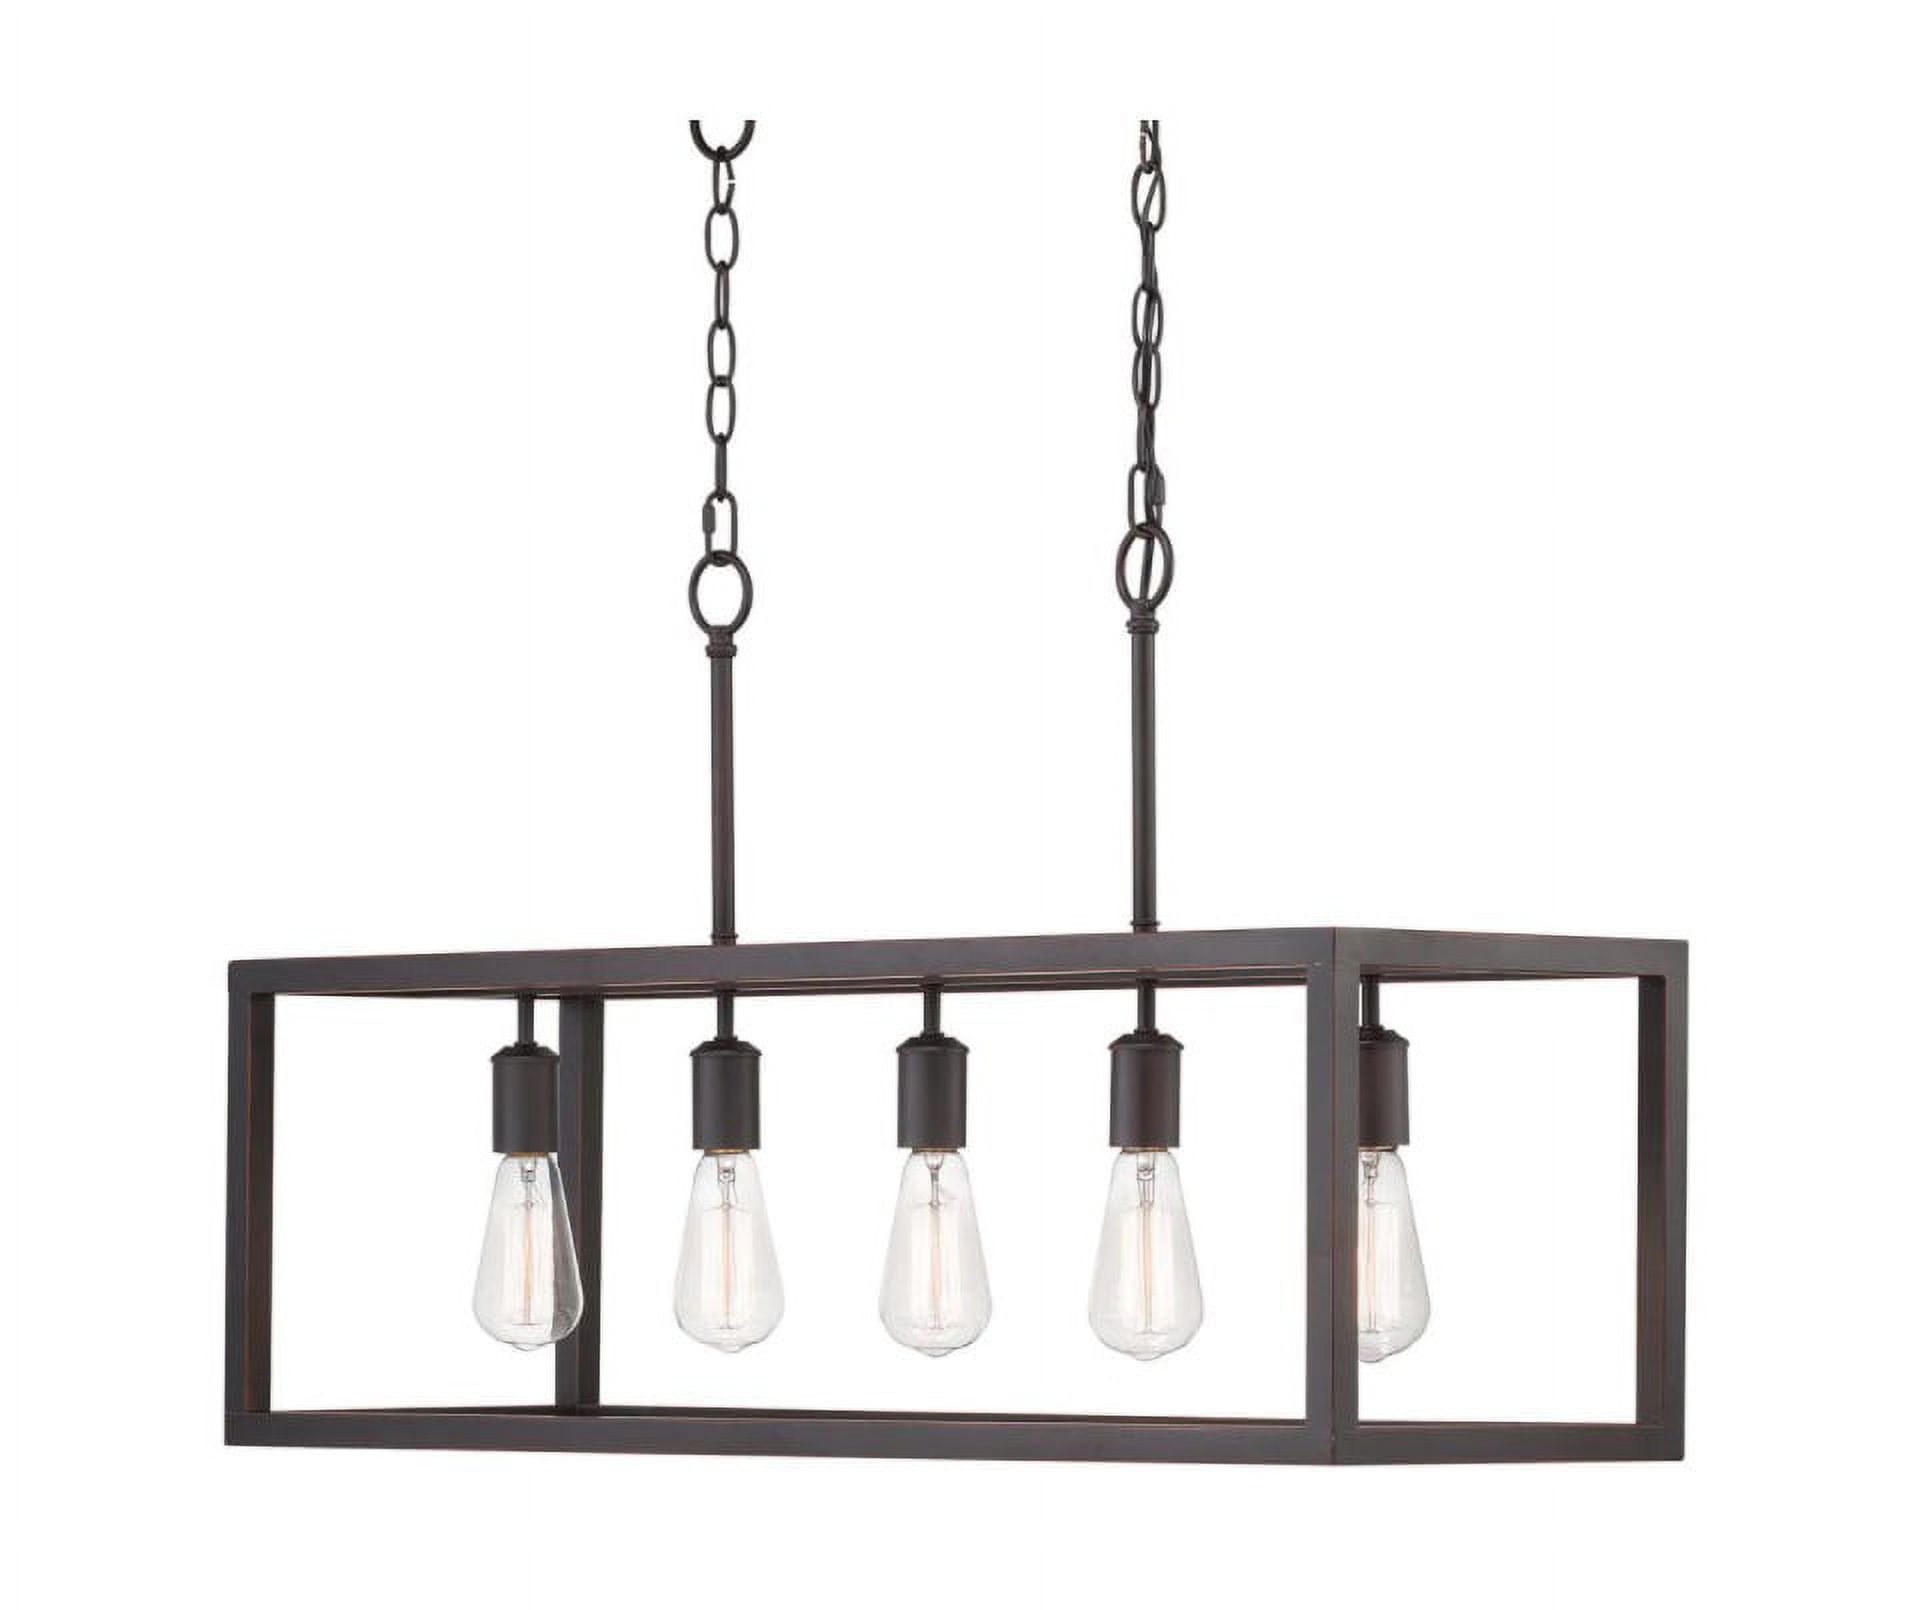 Hampton Bay Boswell Quarter 5-Light Black Industrial Linear Island Hanging Chandelier for Kitchen Islands and Dining - image 1 of 6